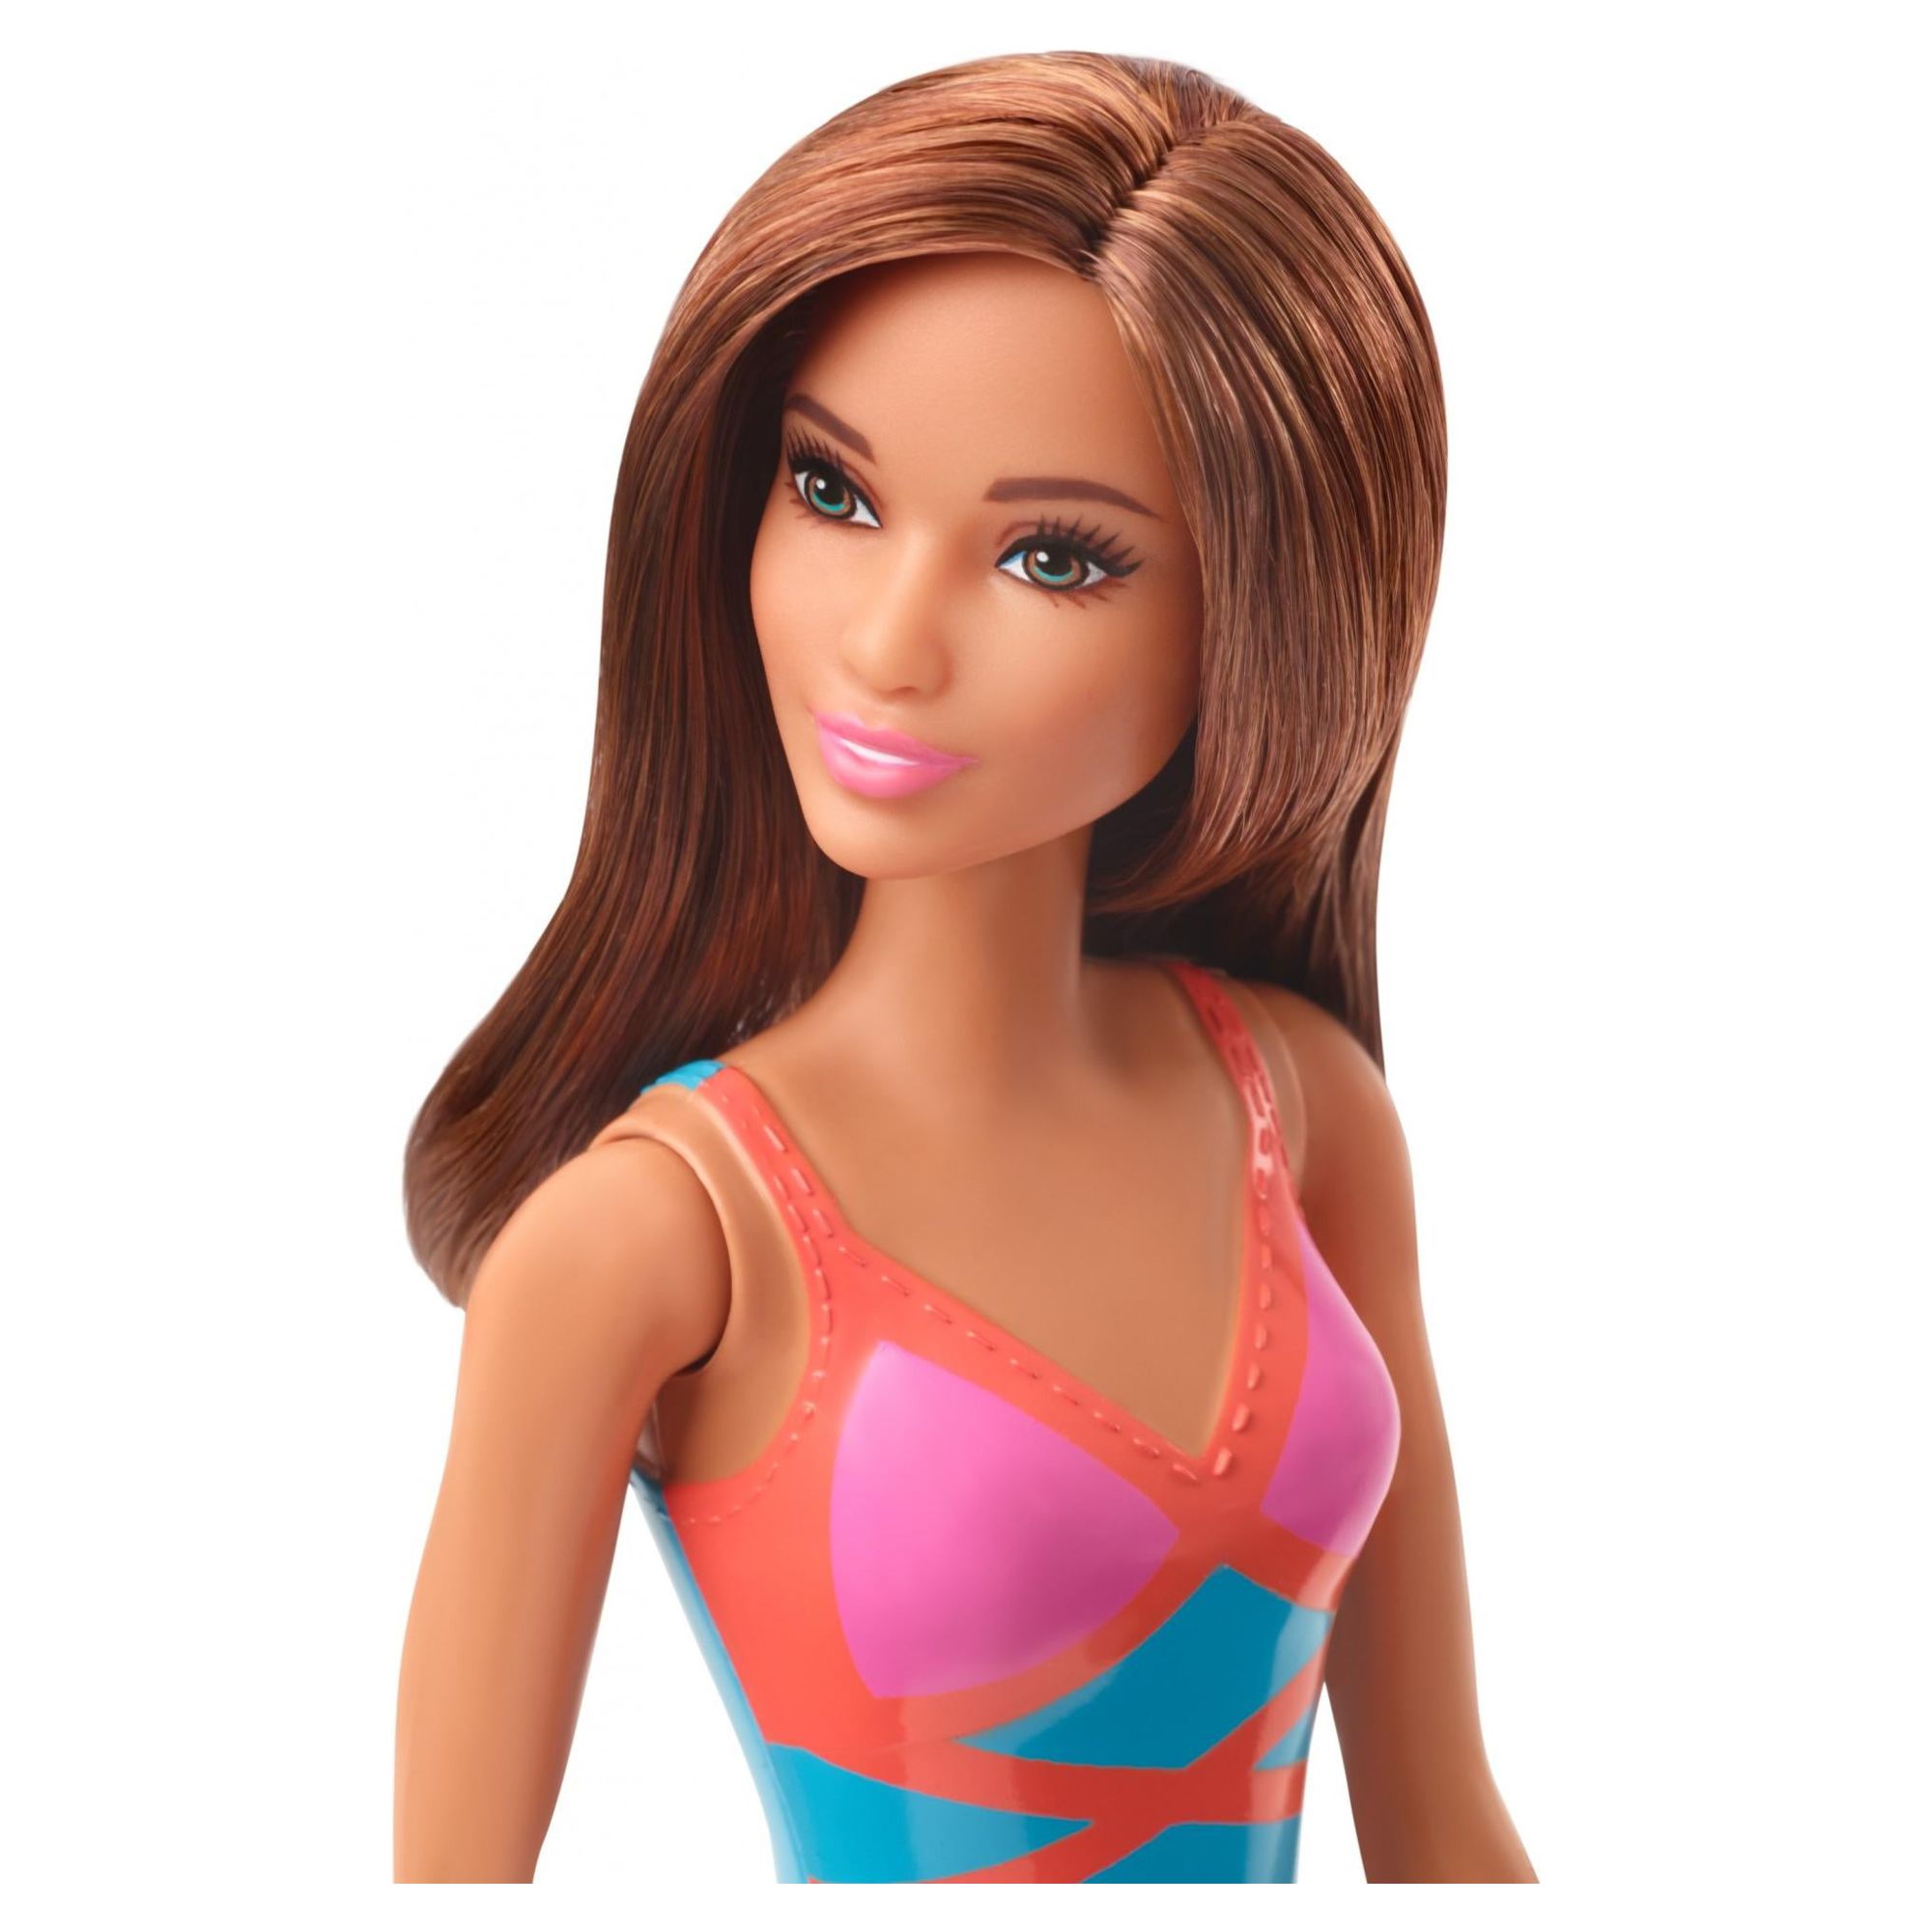 Barbie Doll, Brunette, Wearing Swimsuit, For Kids 3 To 7 Years Old, Brunette - image 2 of 6